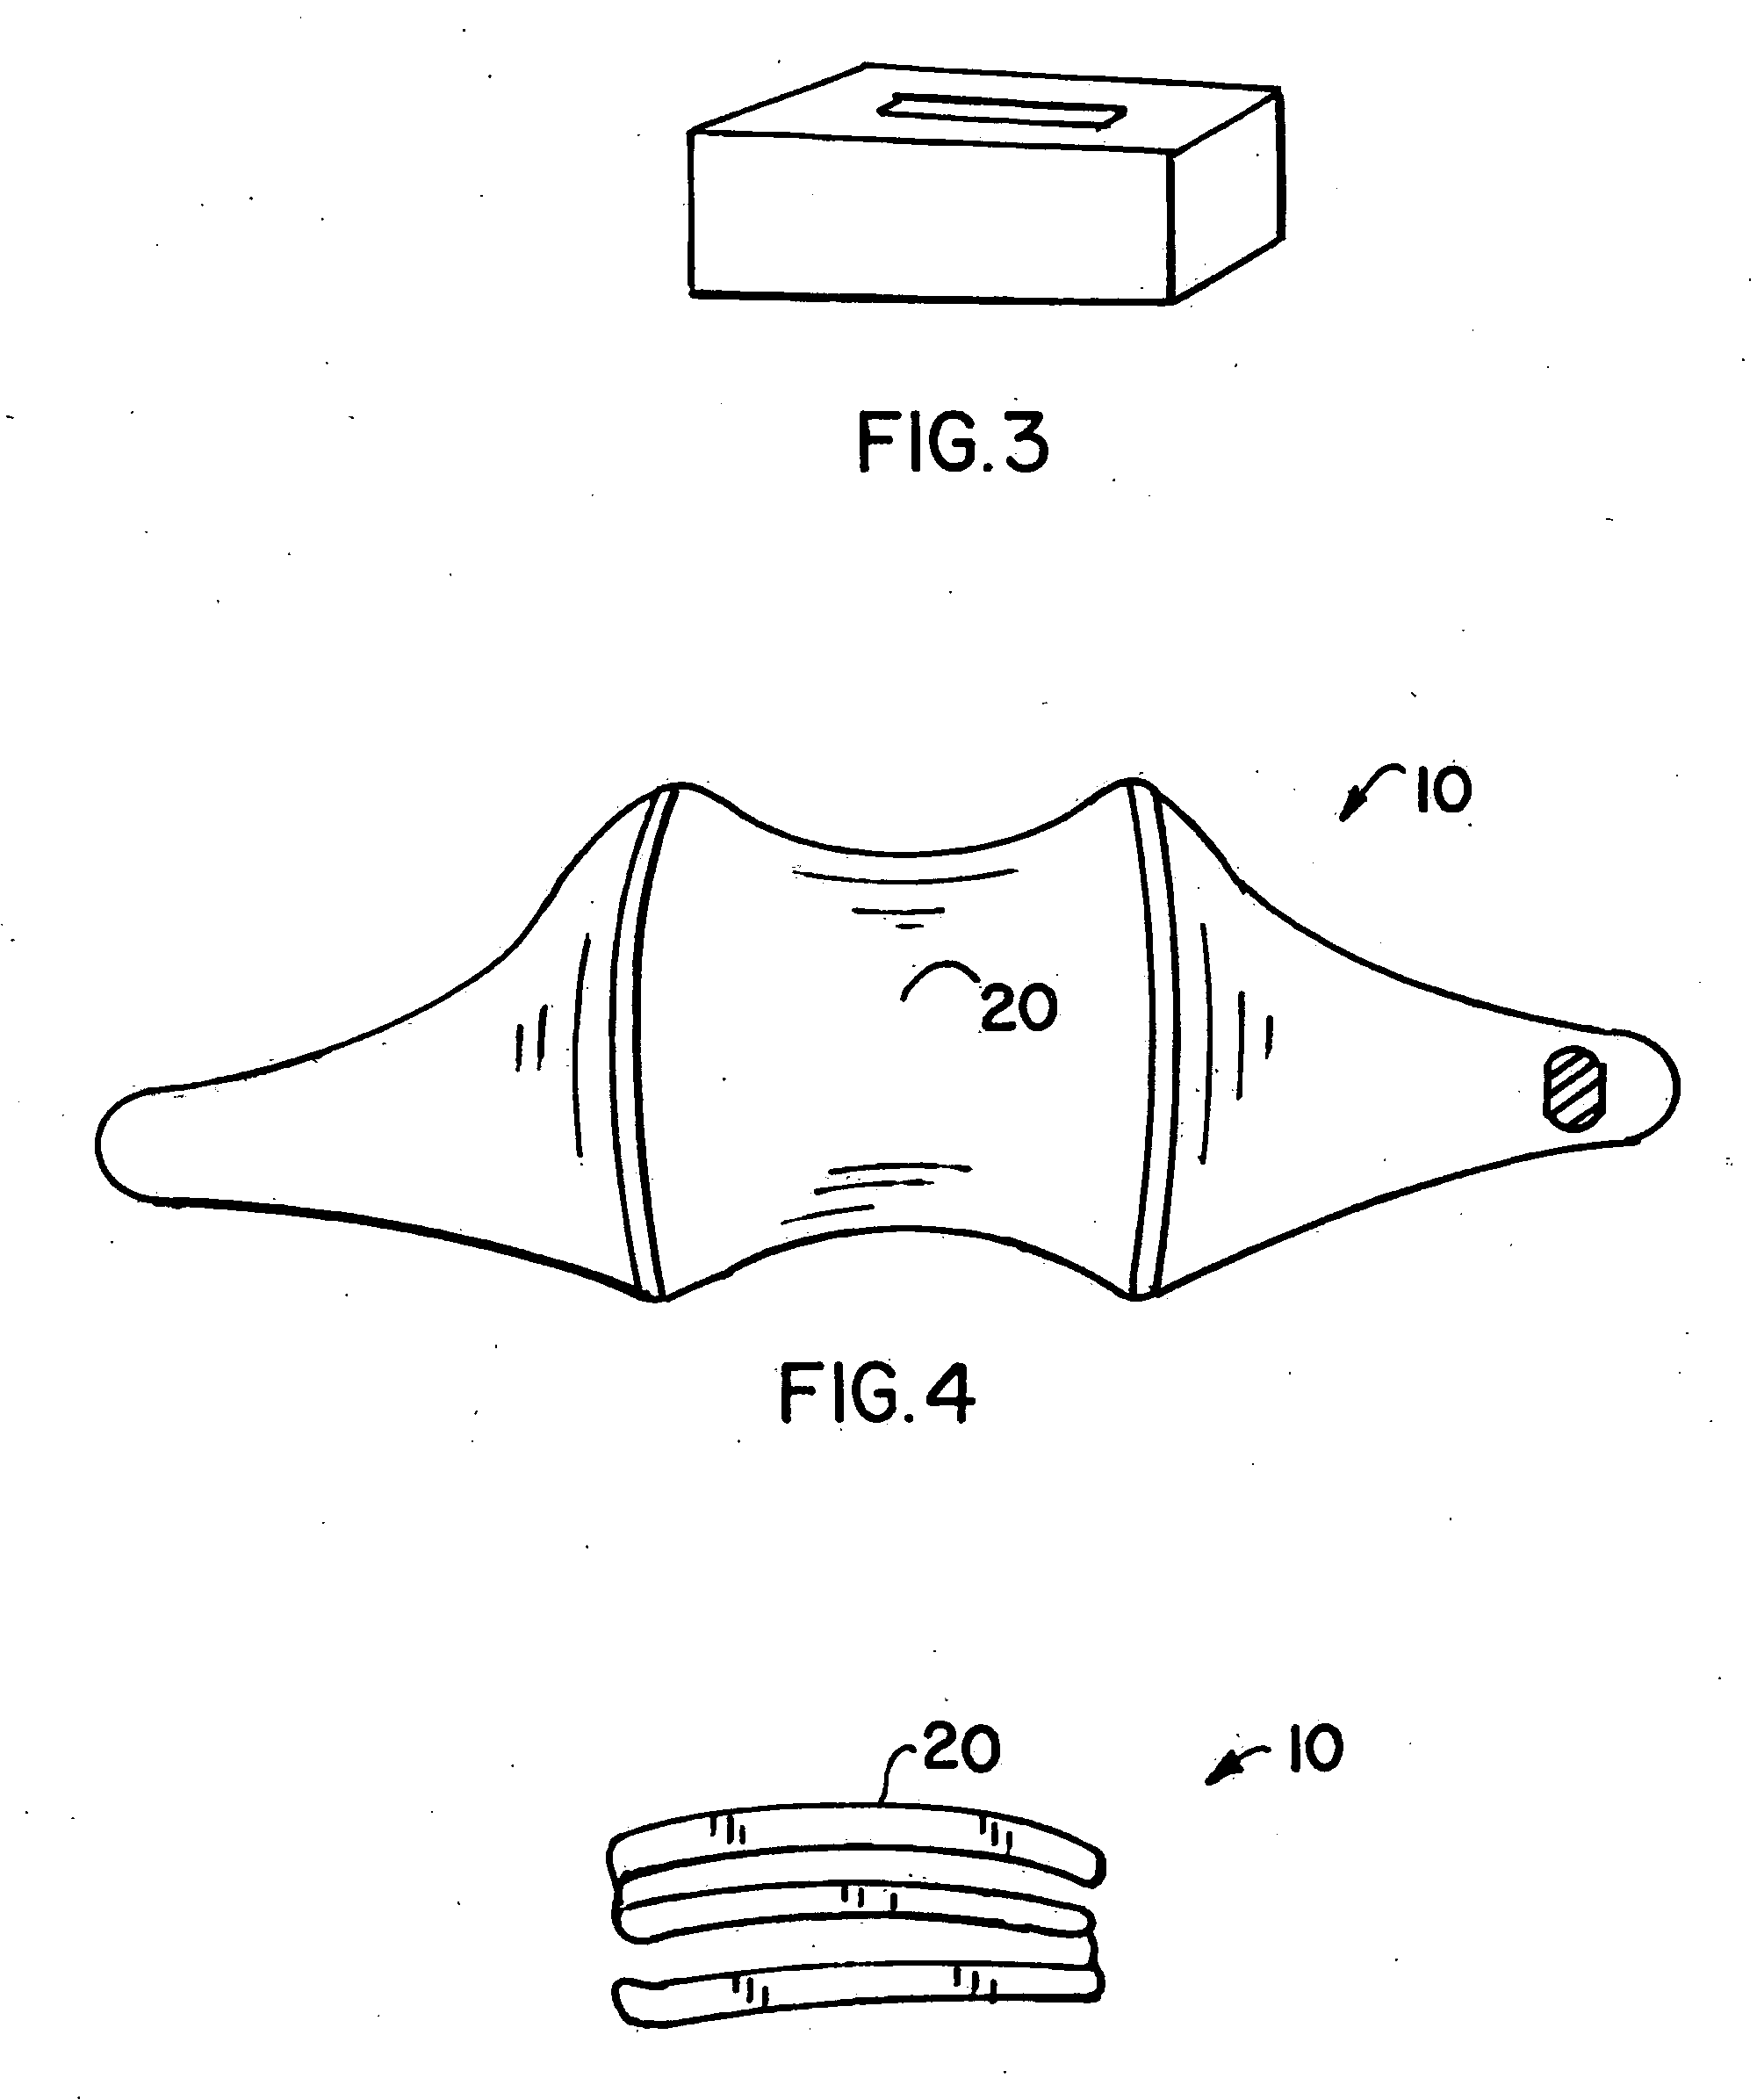 Press-on multicolor application system and method